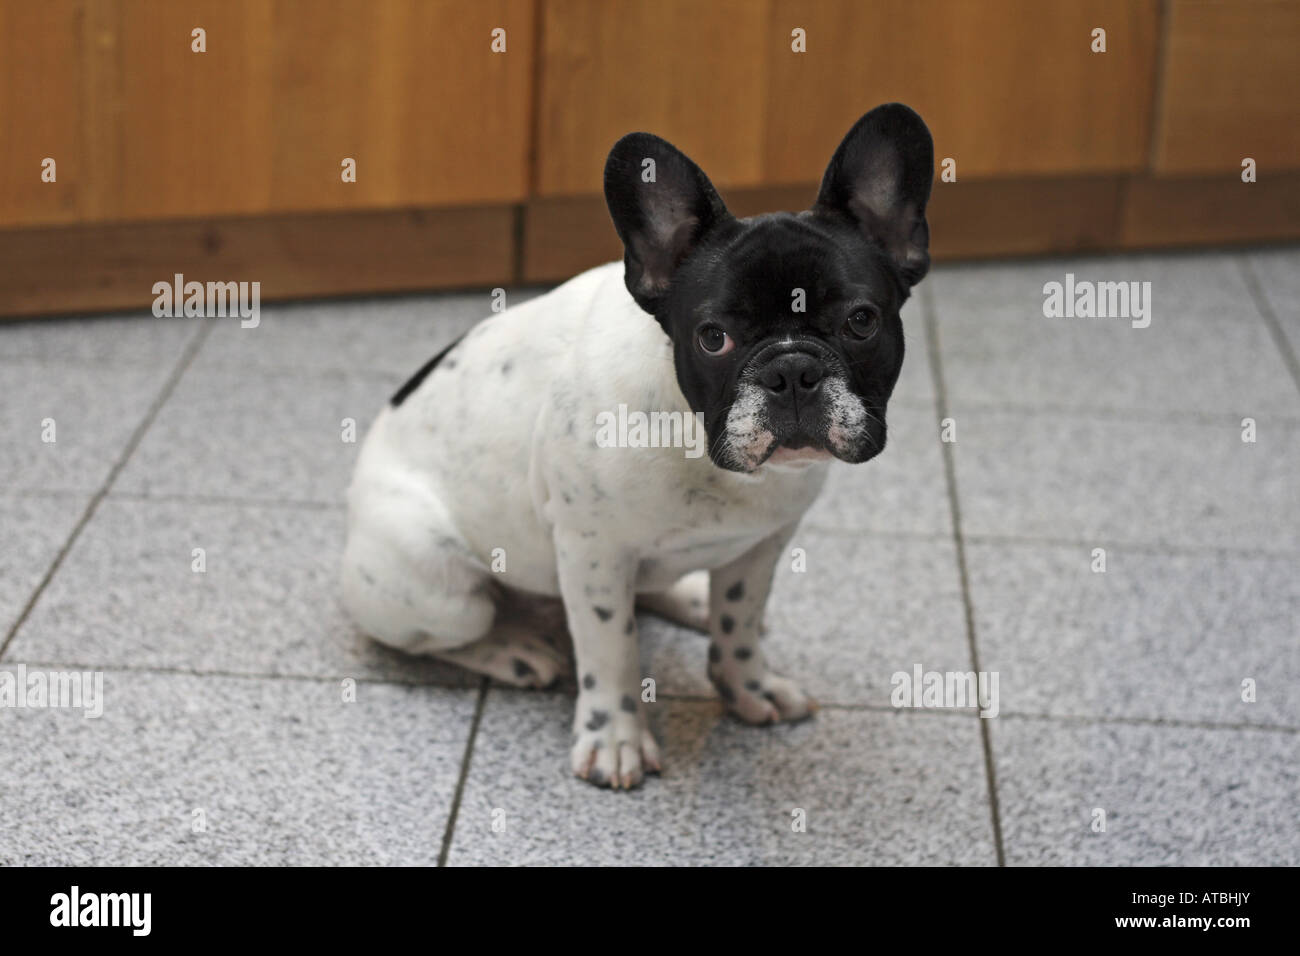 French Bulldog (Canis lupus f. familiaris), five months old puppy sitting in the kitchen Stock Photo